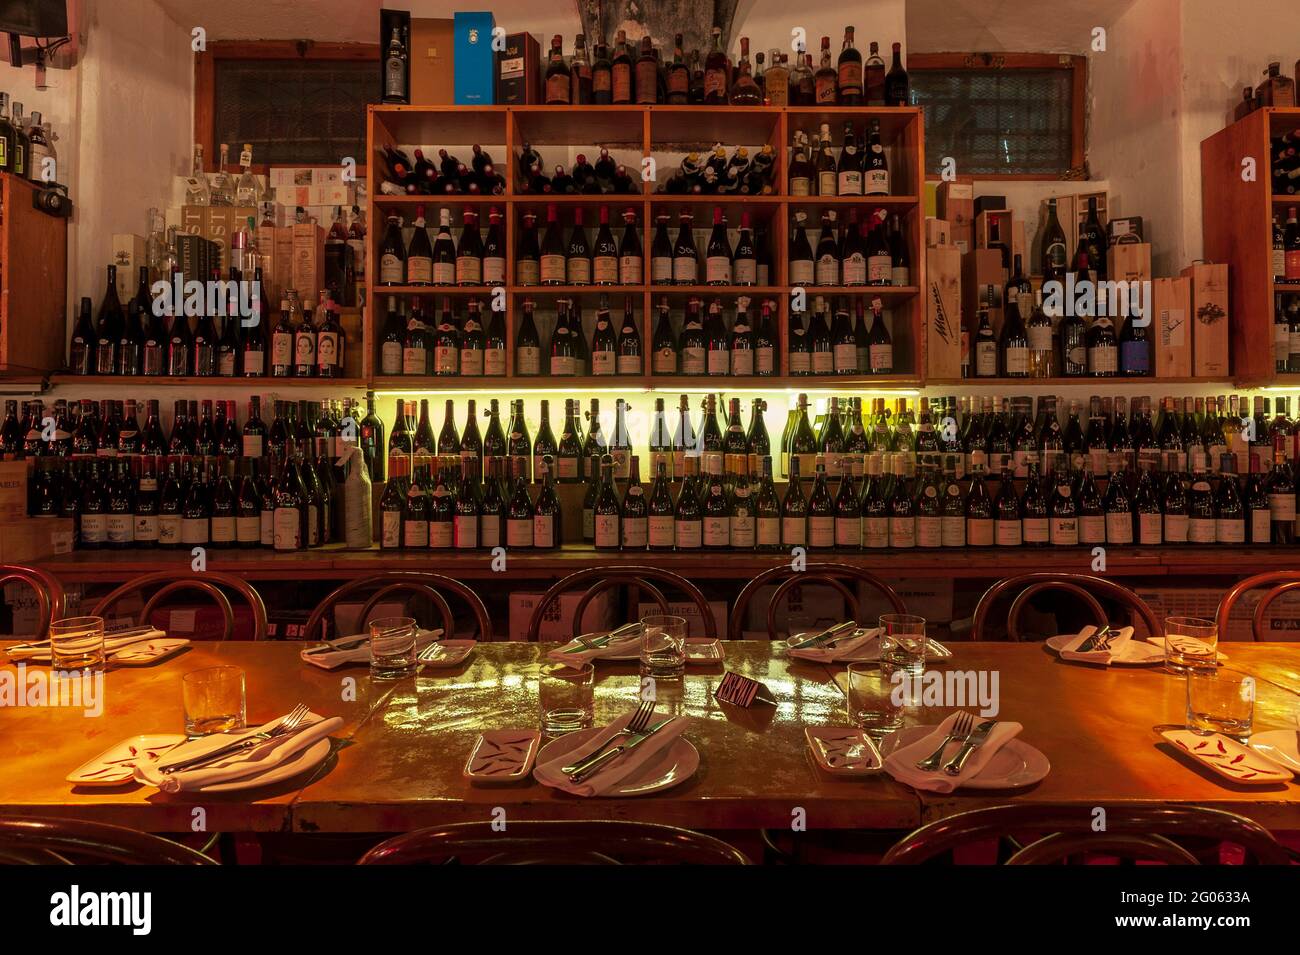 N’ombra de Vin, Cafè and Restaurant in Brera district, Milan, Lombardy, Italy, Europe Stock Photo